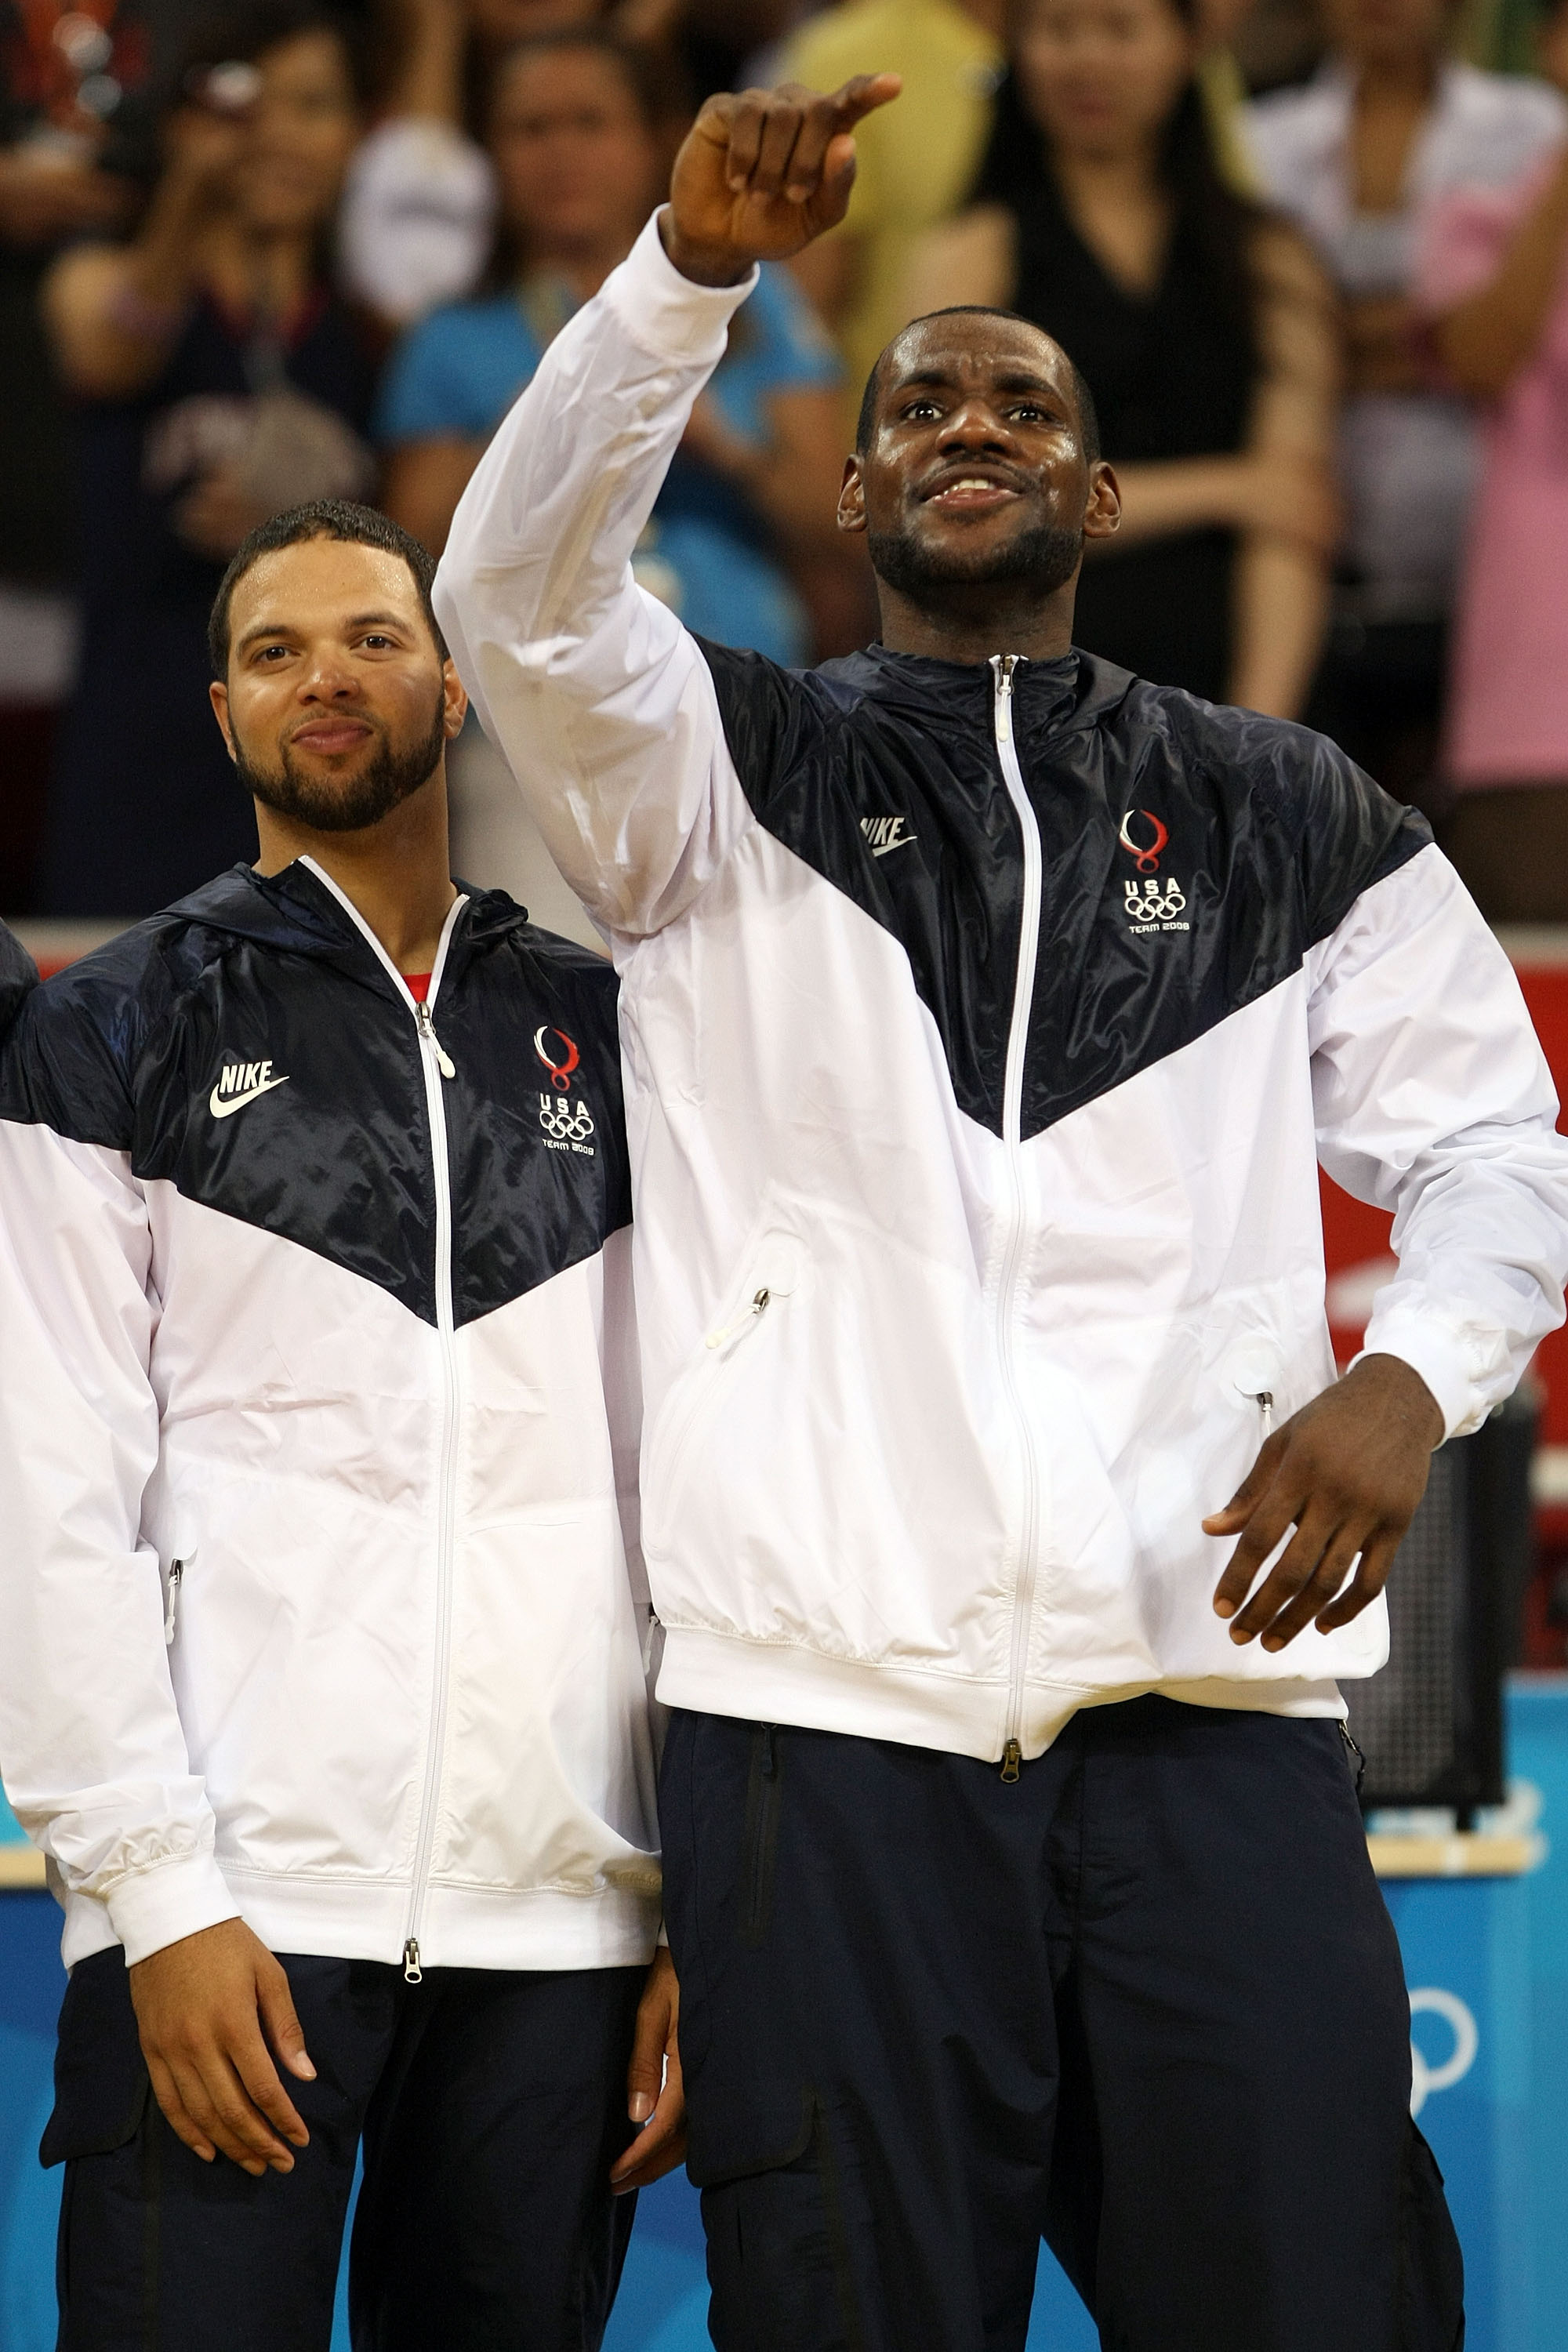 BEIJING - AUGUST 24:  (L-R)  Deron Williams #6 and LeBron James of the United States wait to receive the gold medal after defeating Spain in the men's basketball final during Day 16 of the Beijing 2008 Olympic Games at the Beijing Olympic Basketball Gymna